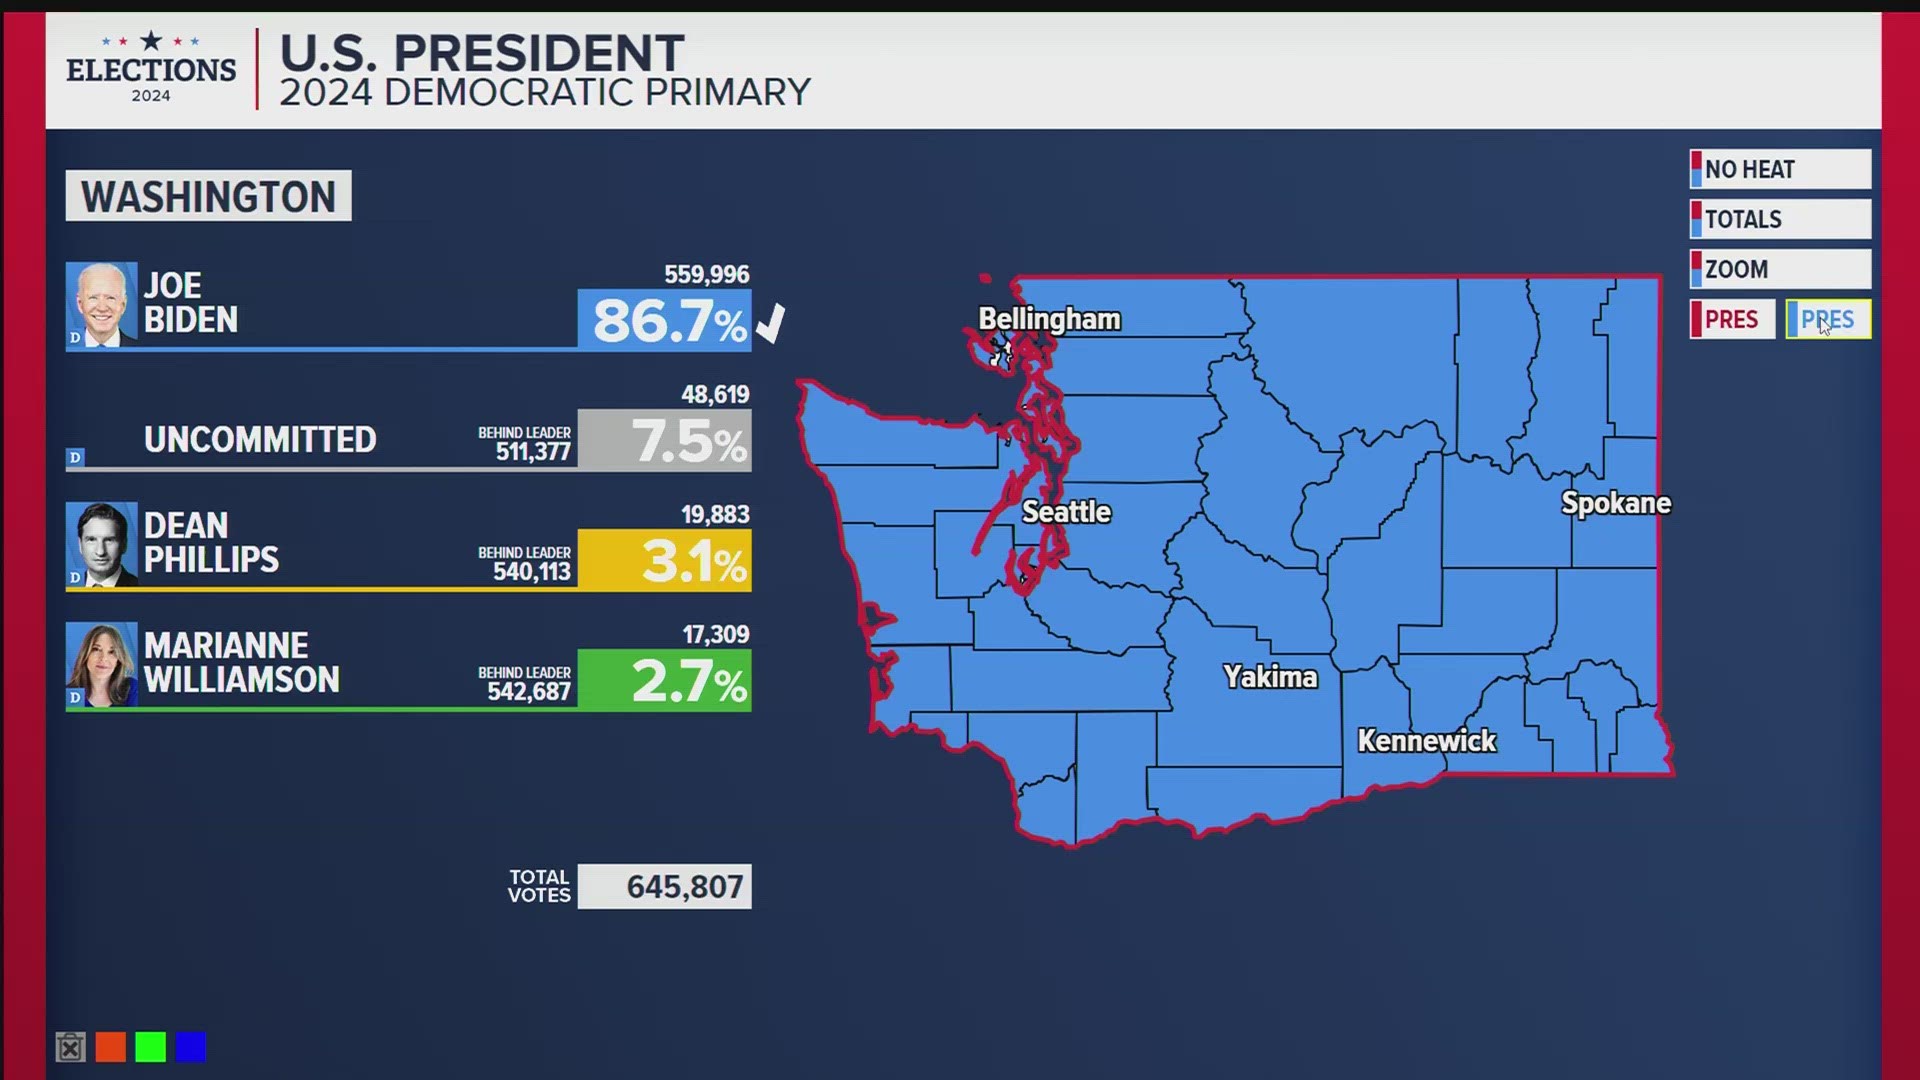 The latest results on the Washington state primary races as of Wednesday morning.